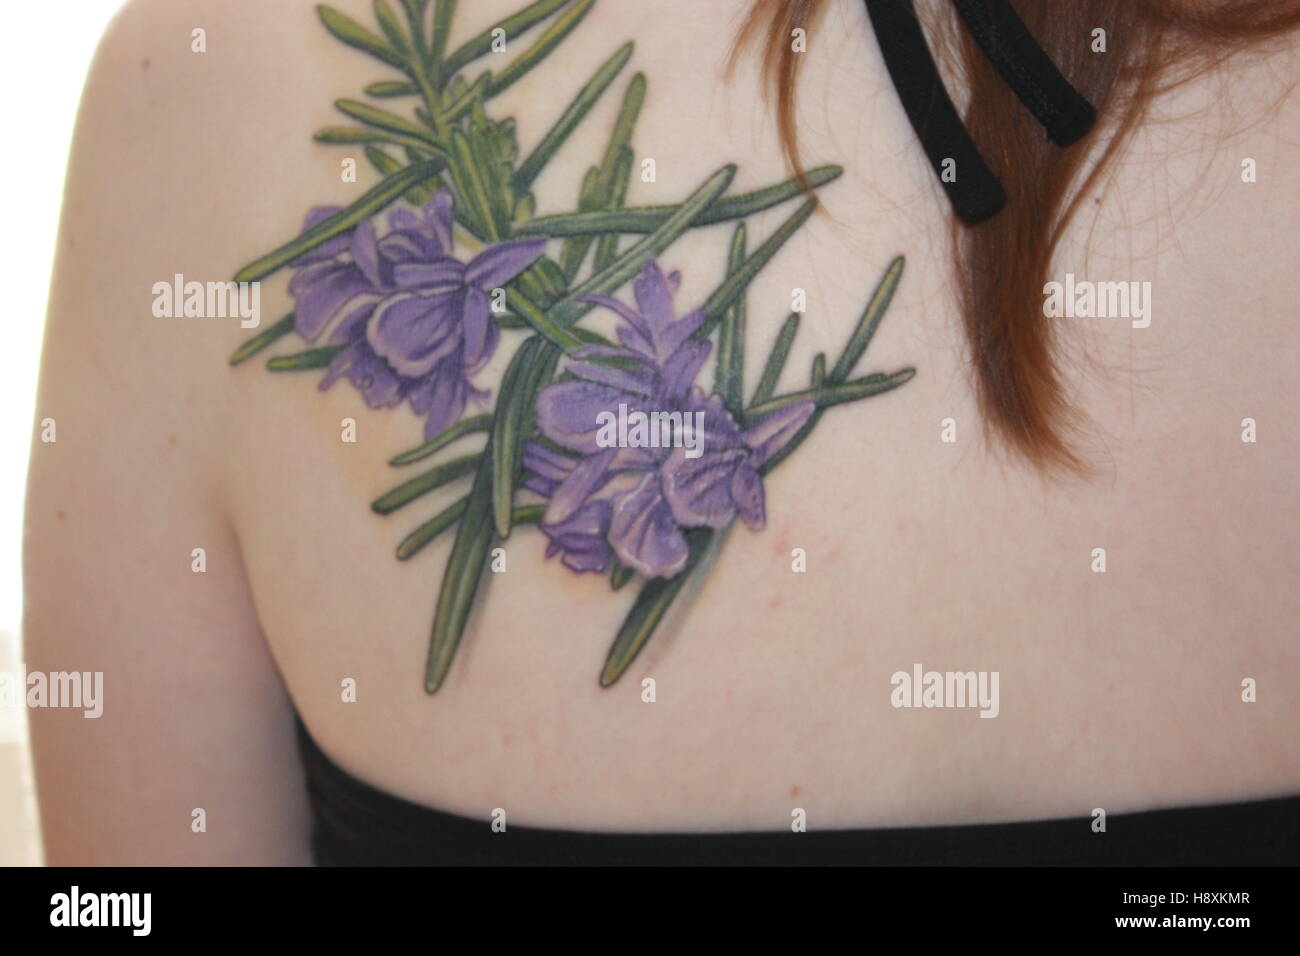 Lavender and rosemary by Ems - Richmond Tattoo Studio | Facebook